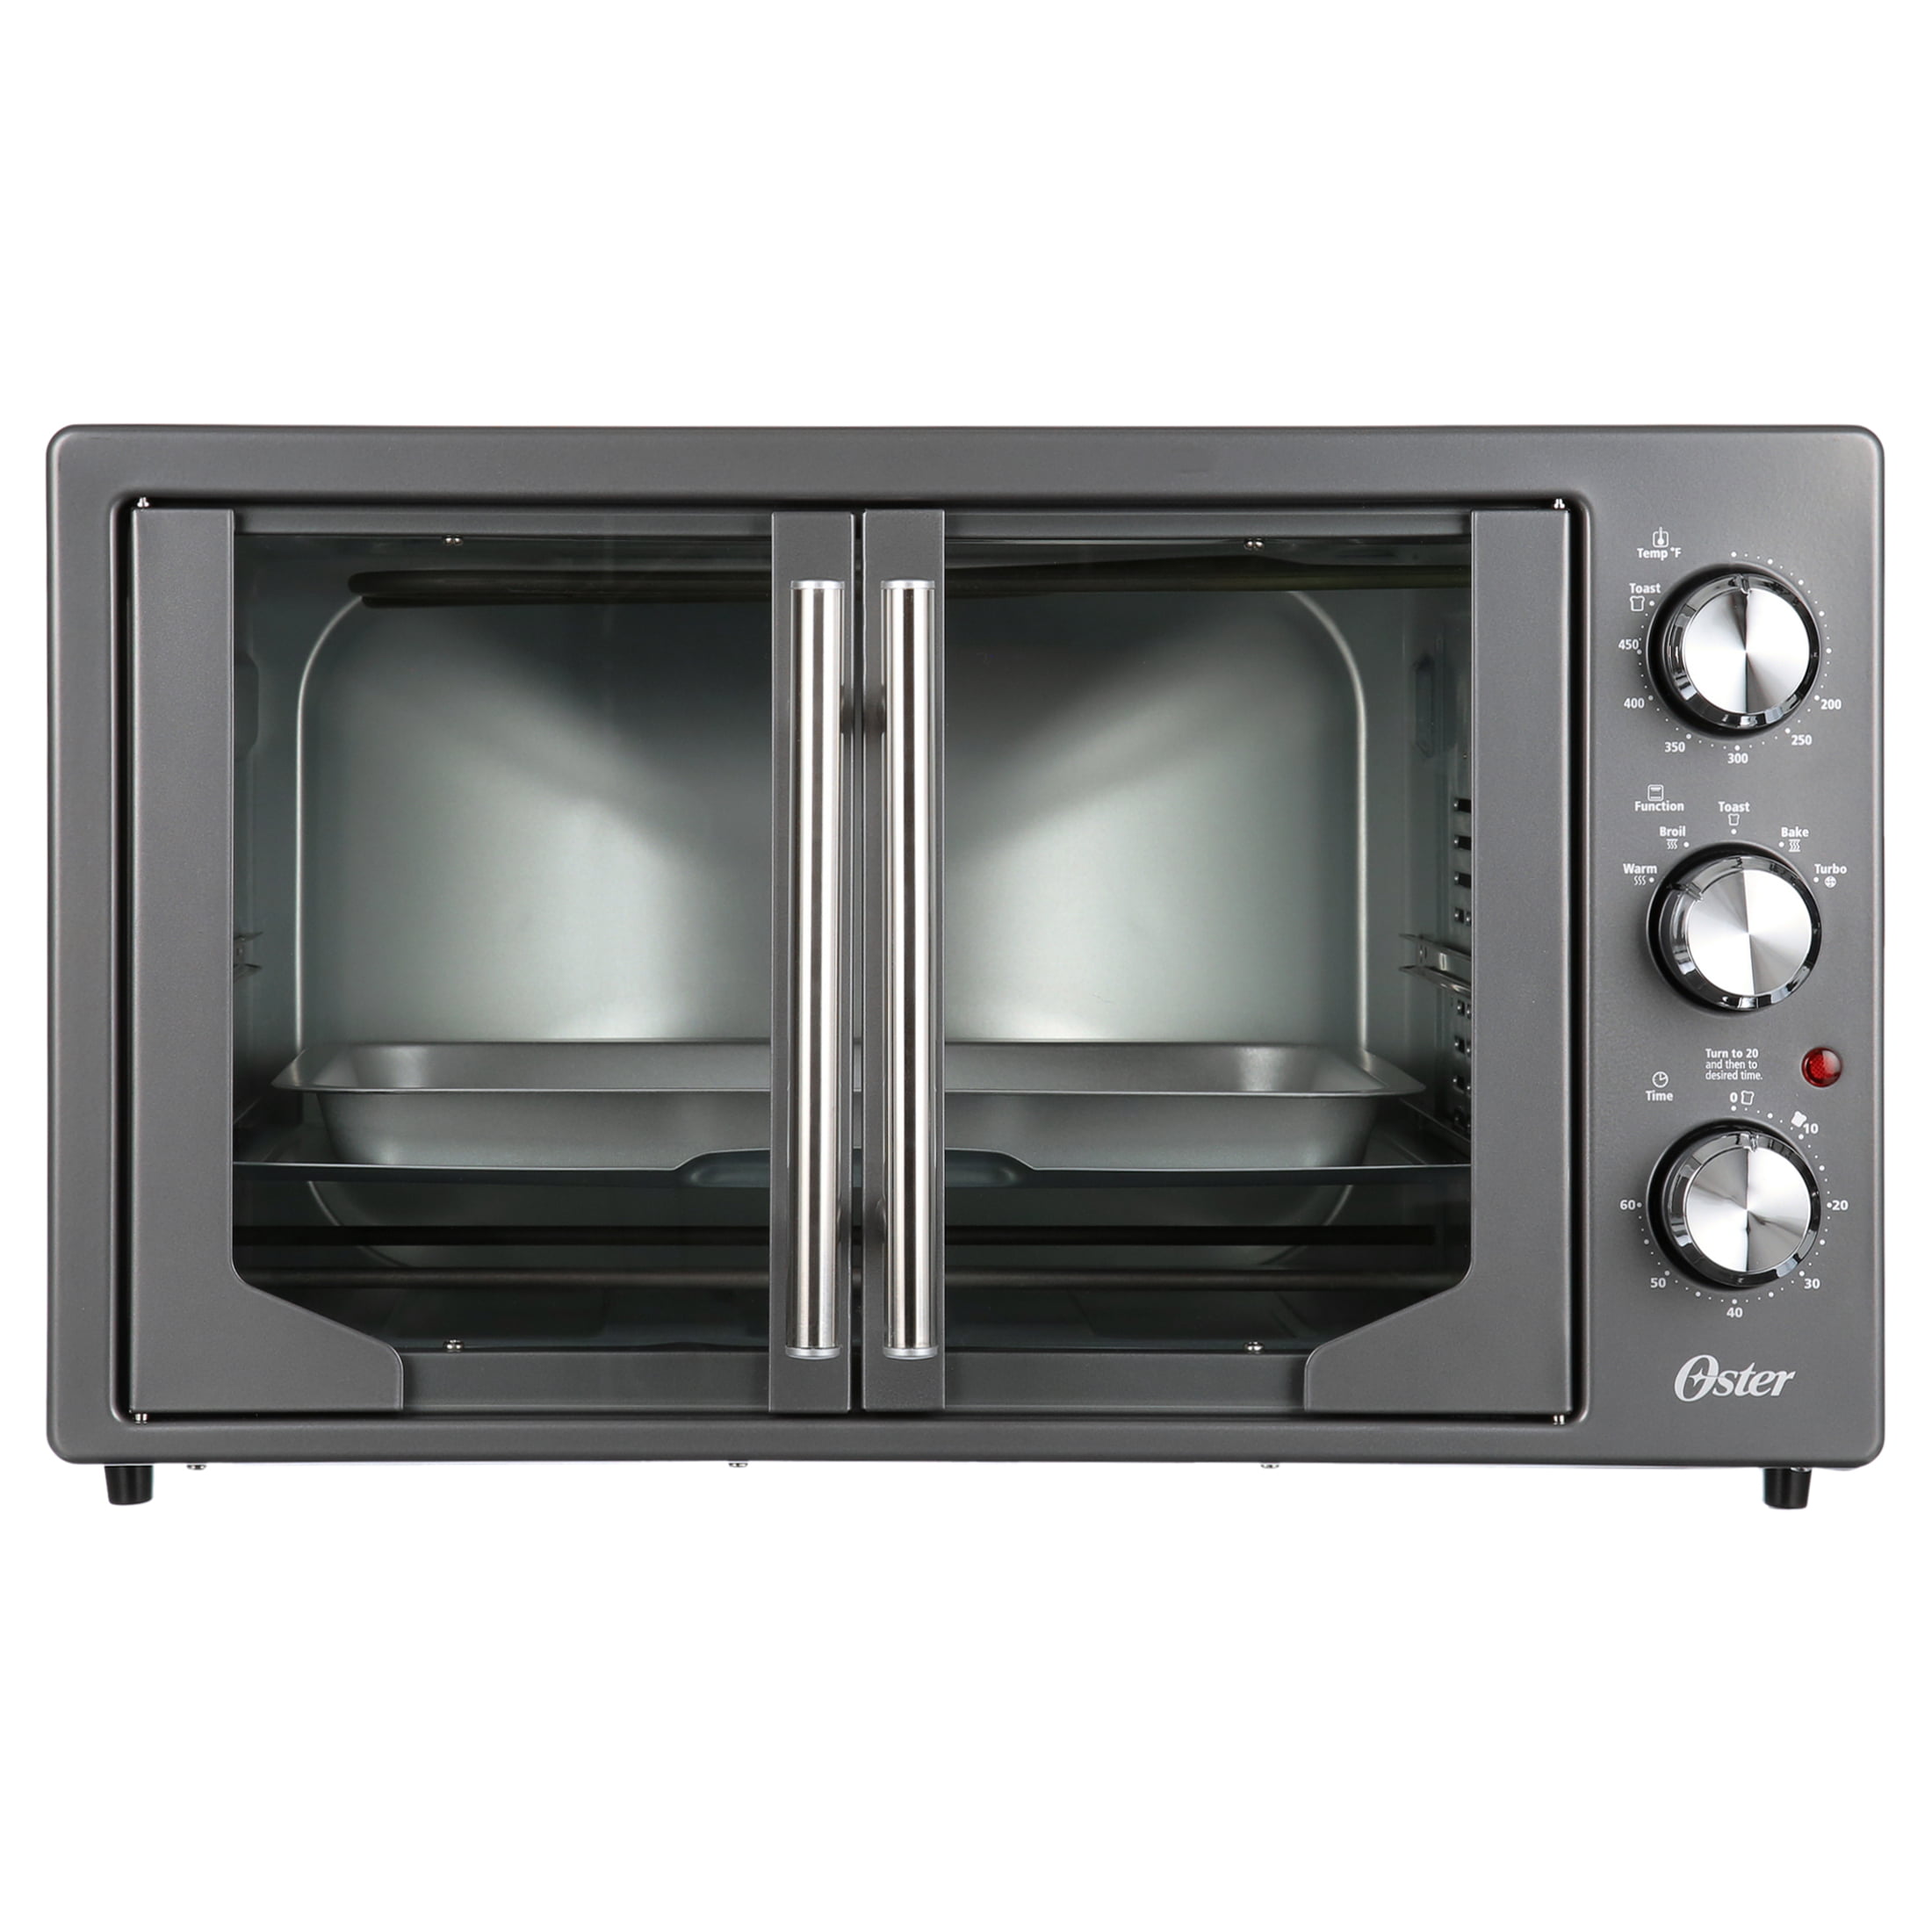 Oster Convection Oven, 8-in-1 Countertop Toaster Oven, XL Fits 2 16  Pizzas, Stainless Steel French Door